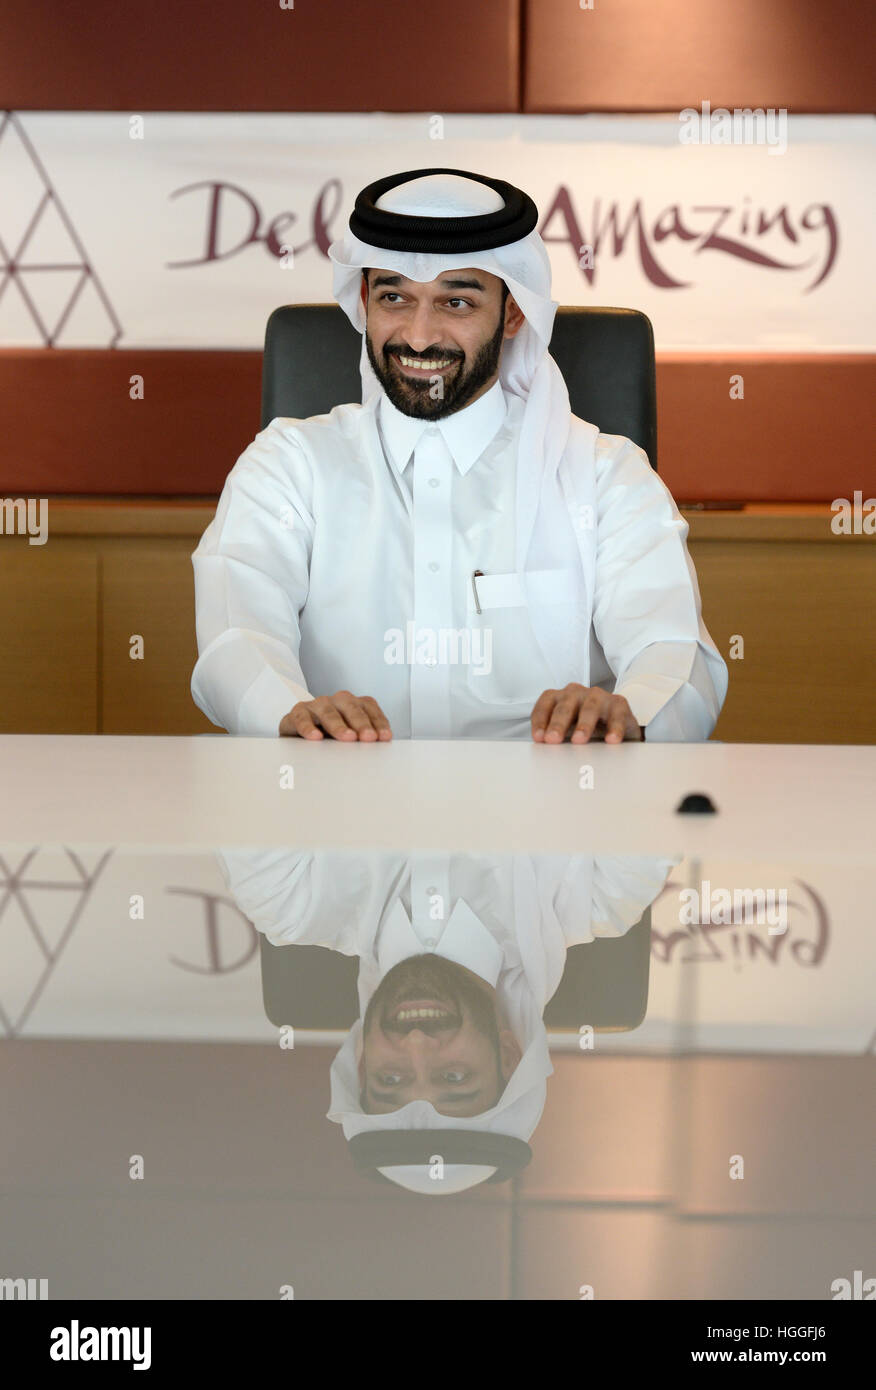 Hassan Al Thawadi, Secretary General of the Supreme Committee for Delivery & Legacy of the 2022 FIFA World Cup speaks during an interview in a conference room at the Al Bidda Tower, the residence of the committee in Al Khor, Qatar, 9 Janaury 2017. Photo: Andreas Gebert/dpa Stock Photo